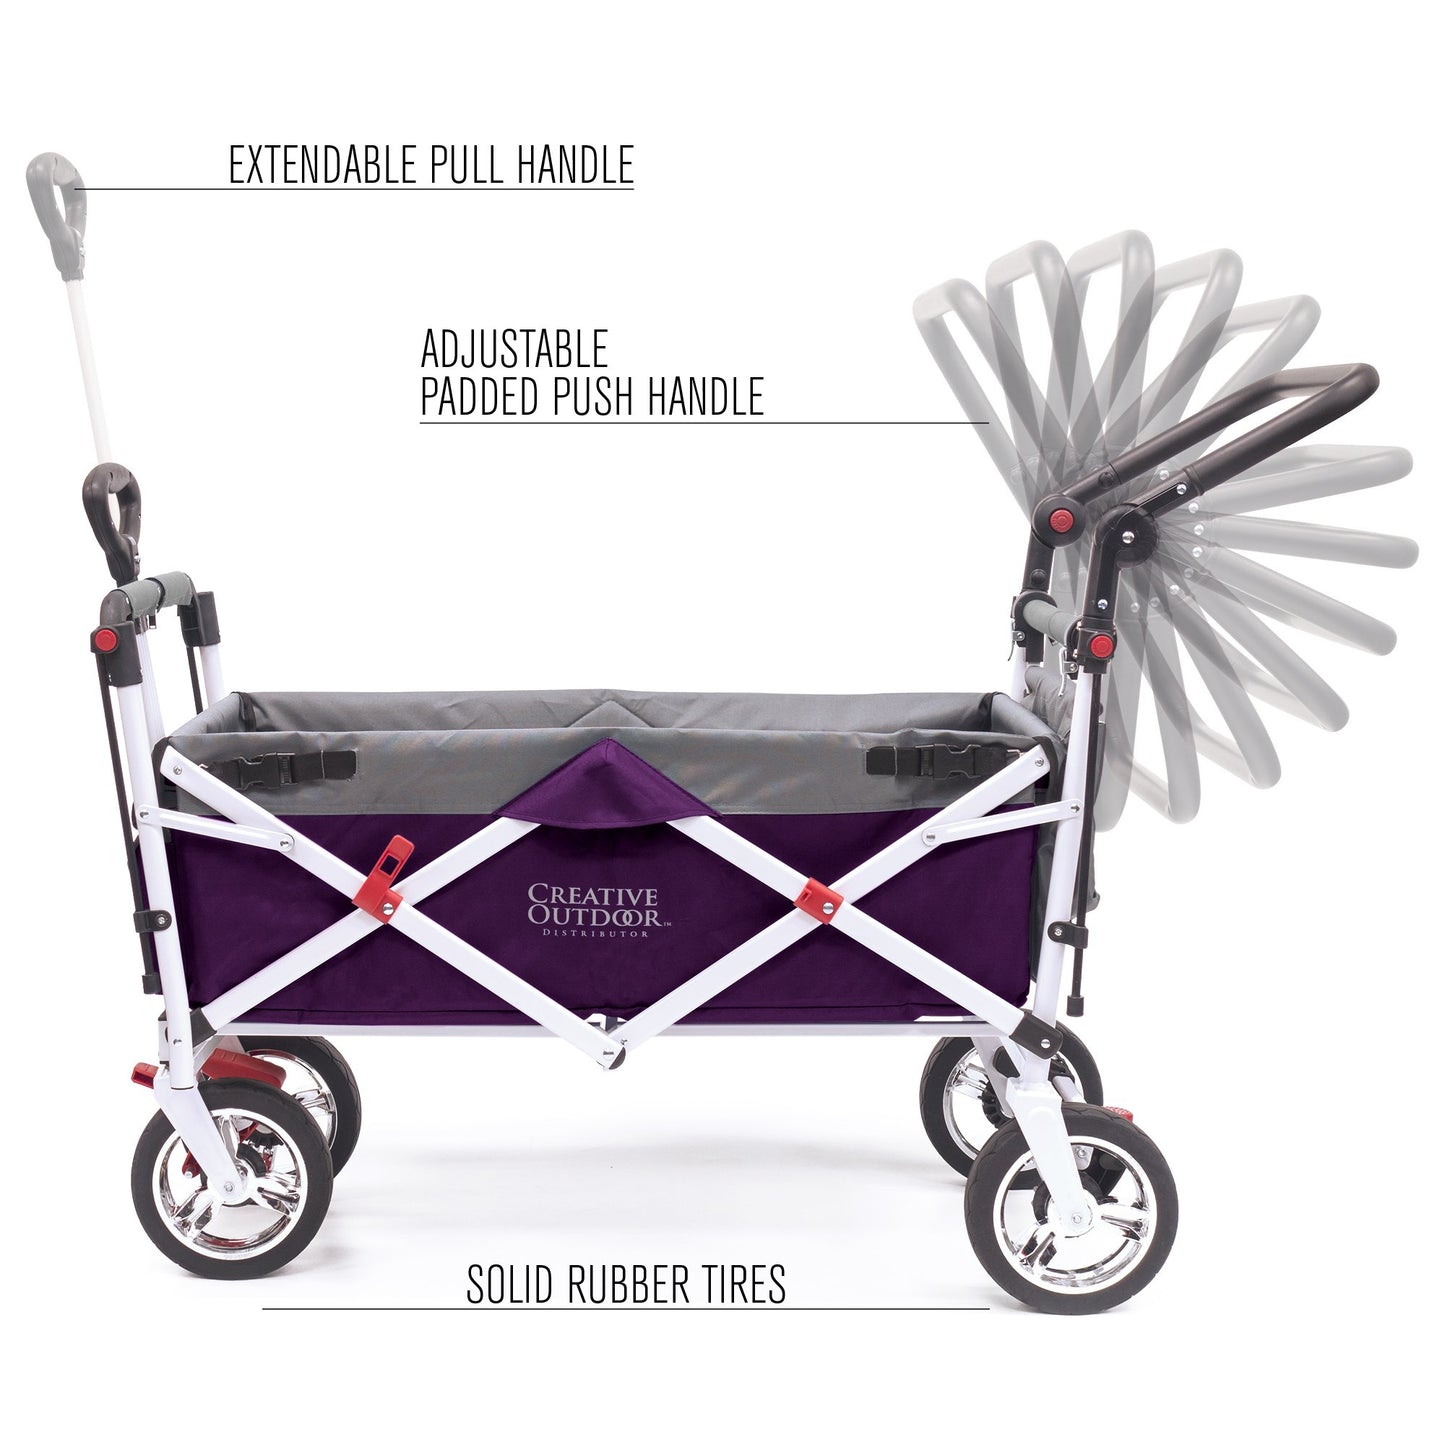 push-pull-silver-series-plus-folding-wagon-stroller-with-canopy-purple